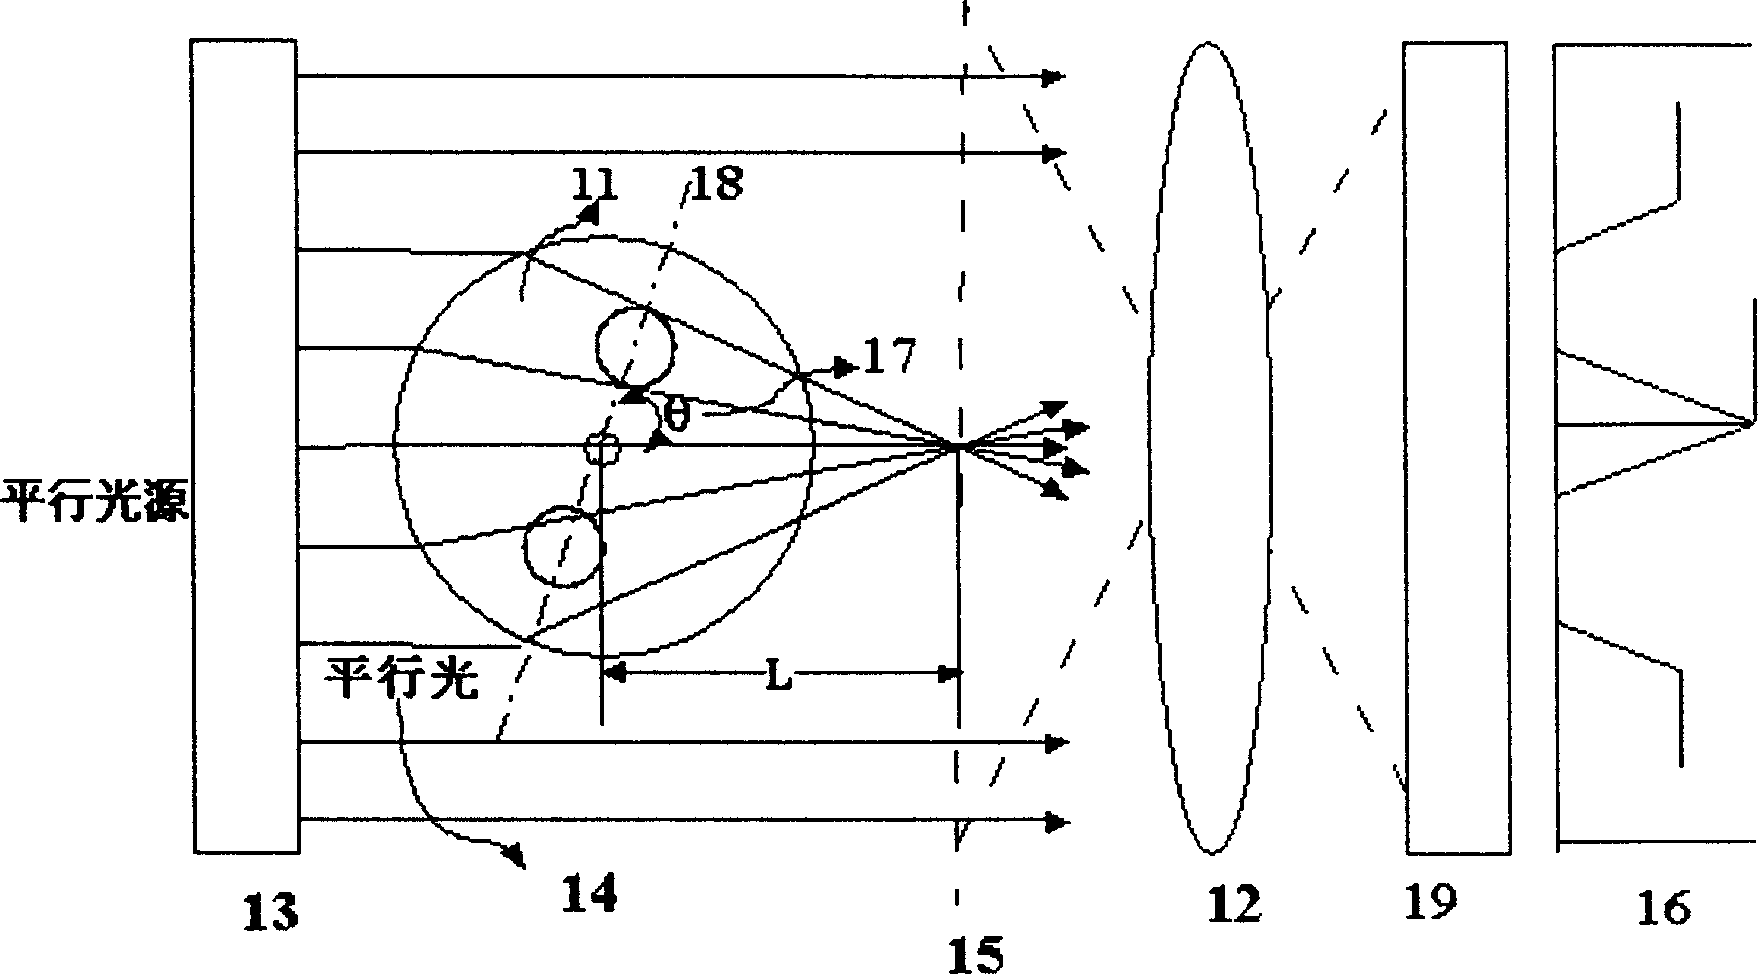 Axling method of polarization protection fibre-optical polarization axle based on side-looking light-intensity distributed and its application